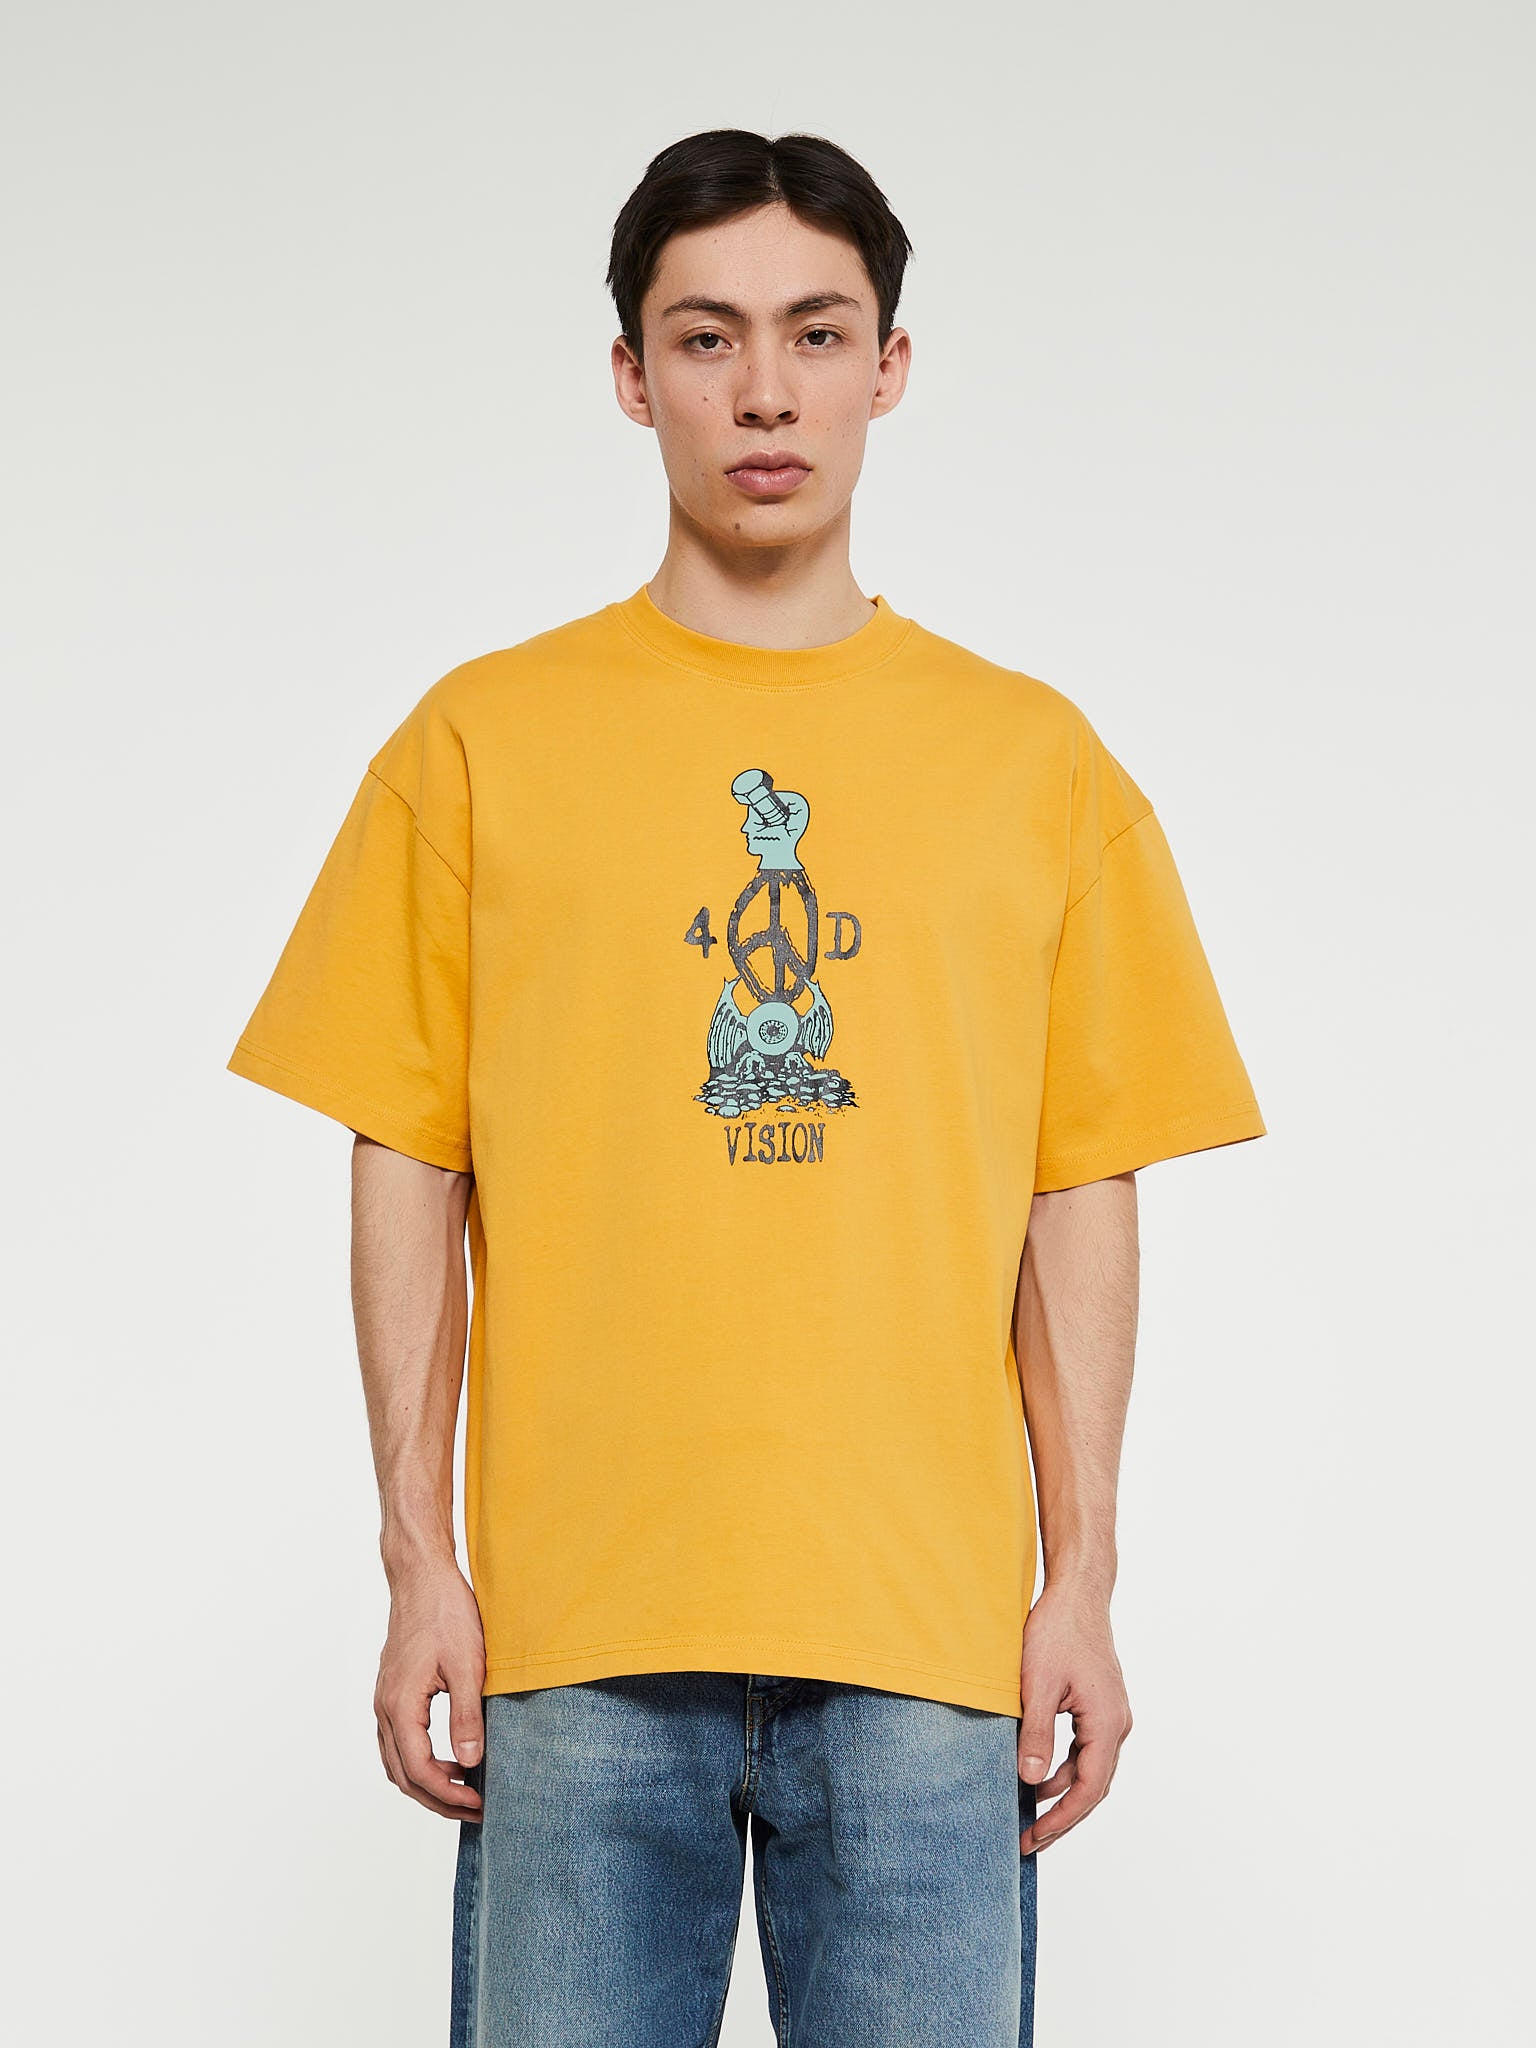 4D Vision Totem T-Shirt in Yellow